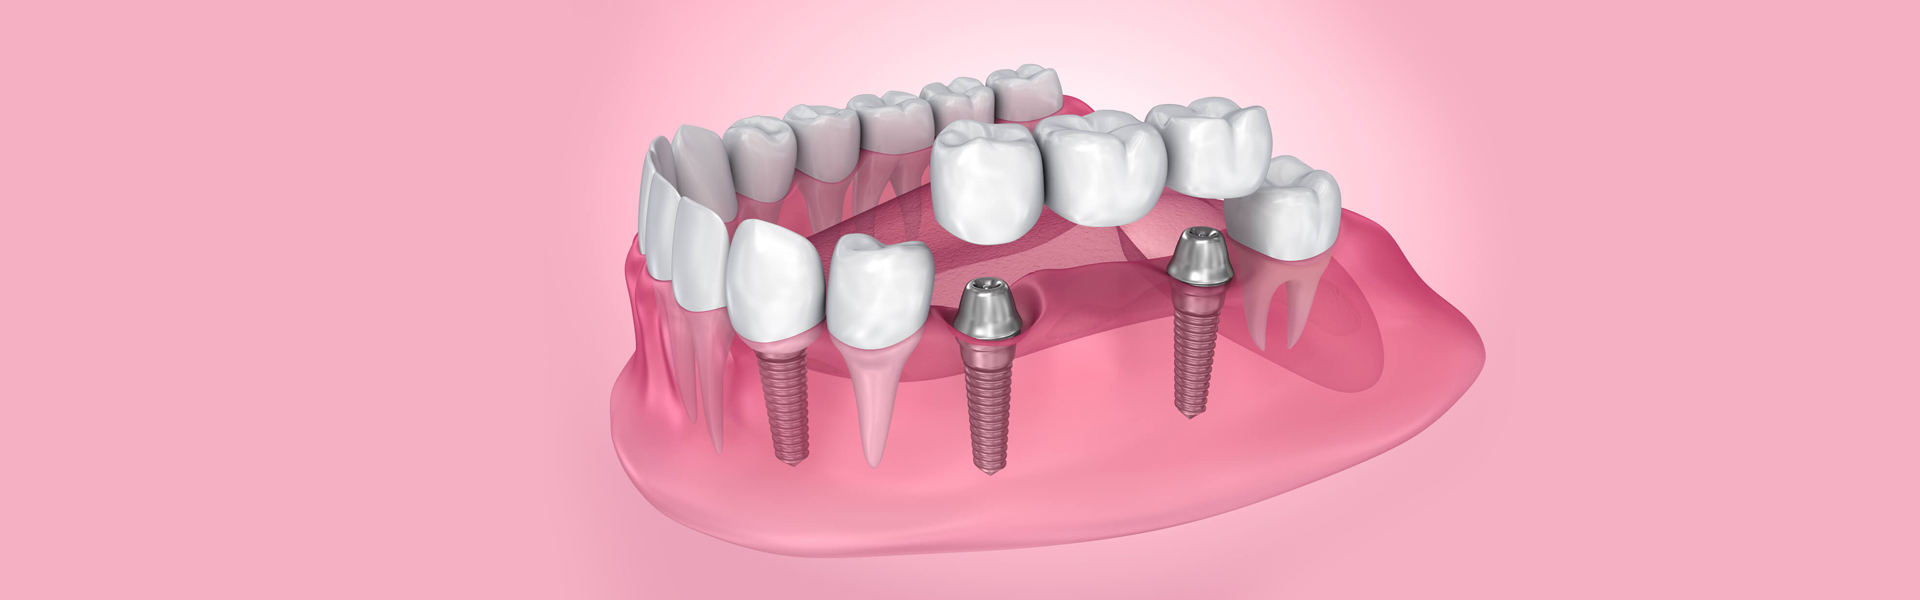 Bridge the Devastating Effects of Tooth Loss with Dental Bridges